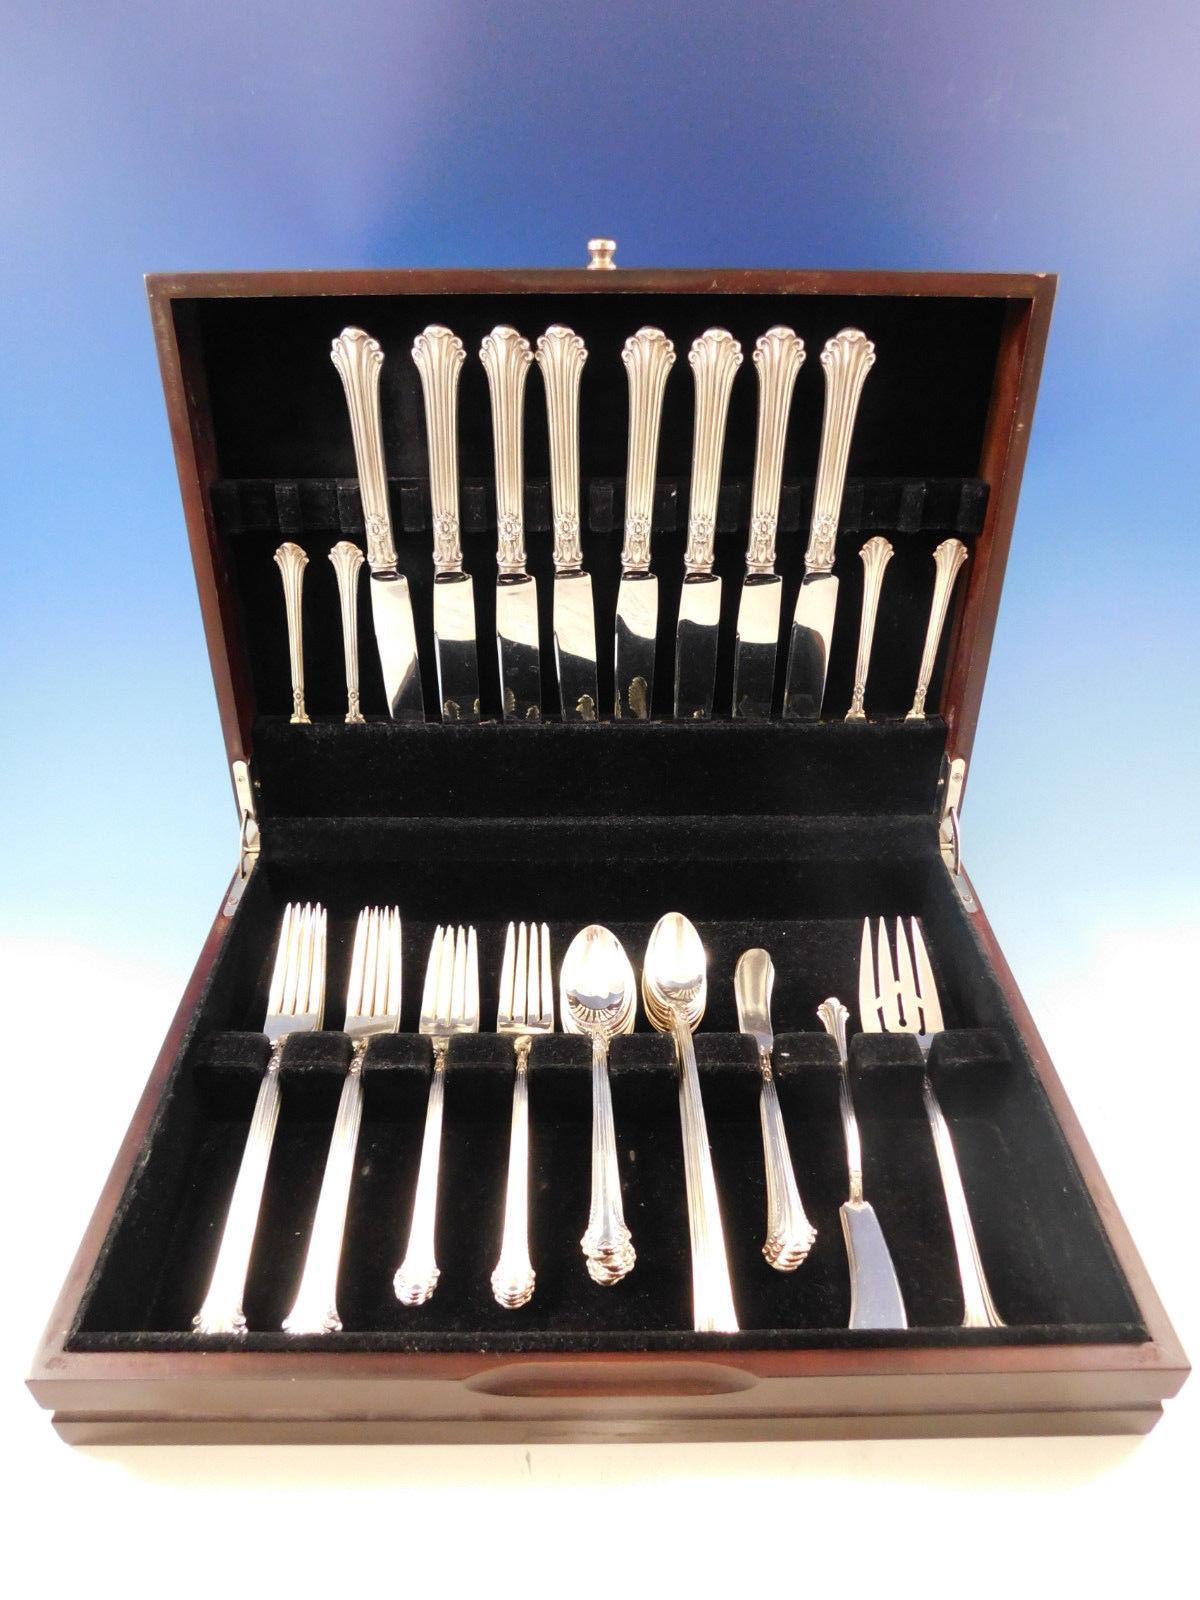 Dinner size silver plumes by Towle sterling silver flatware set, 50 pieces. This set includes:

8 dinner size knives, 9 5/8